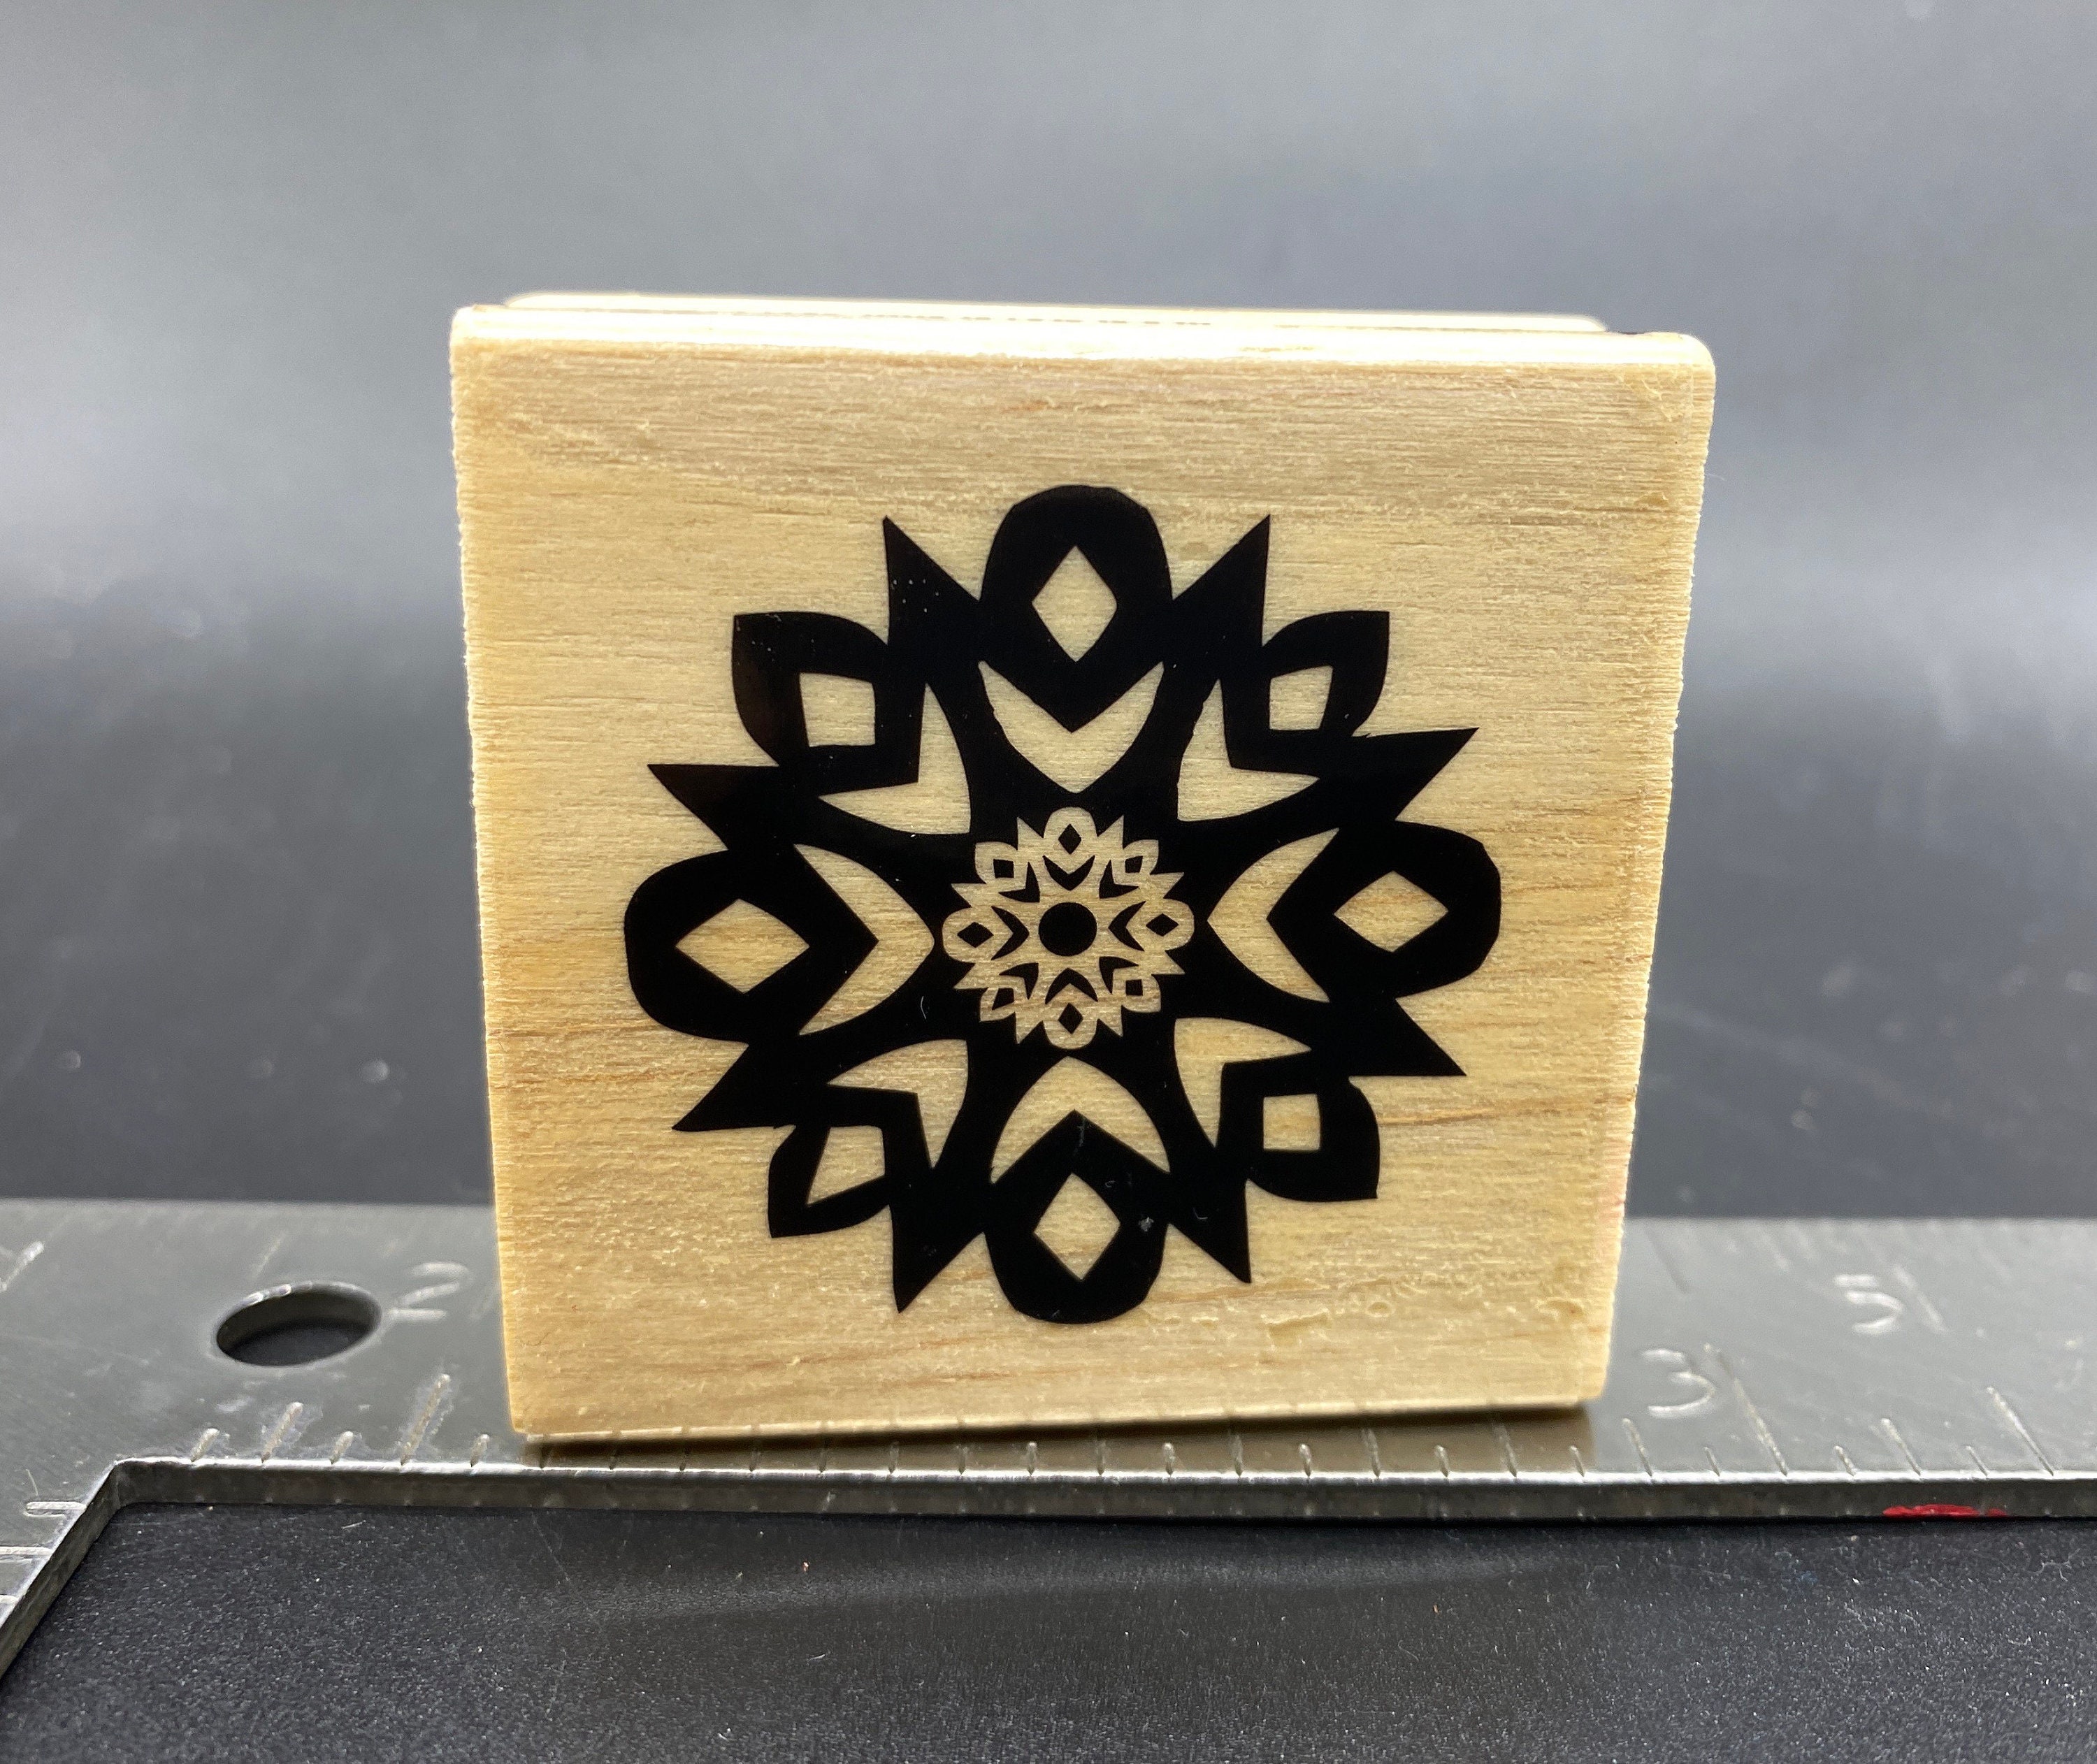 Snowflake Used Rubber Stamp View All Photos